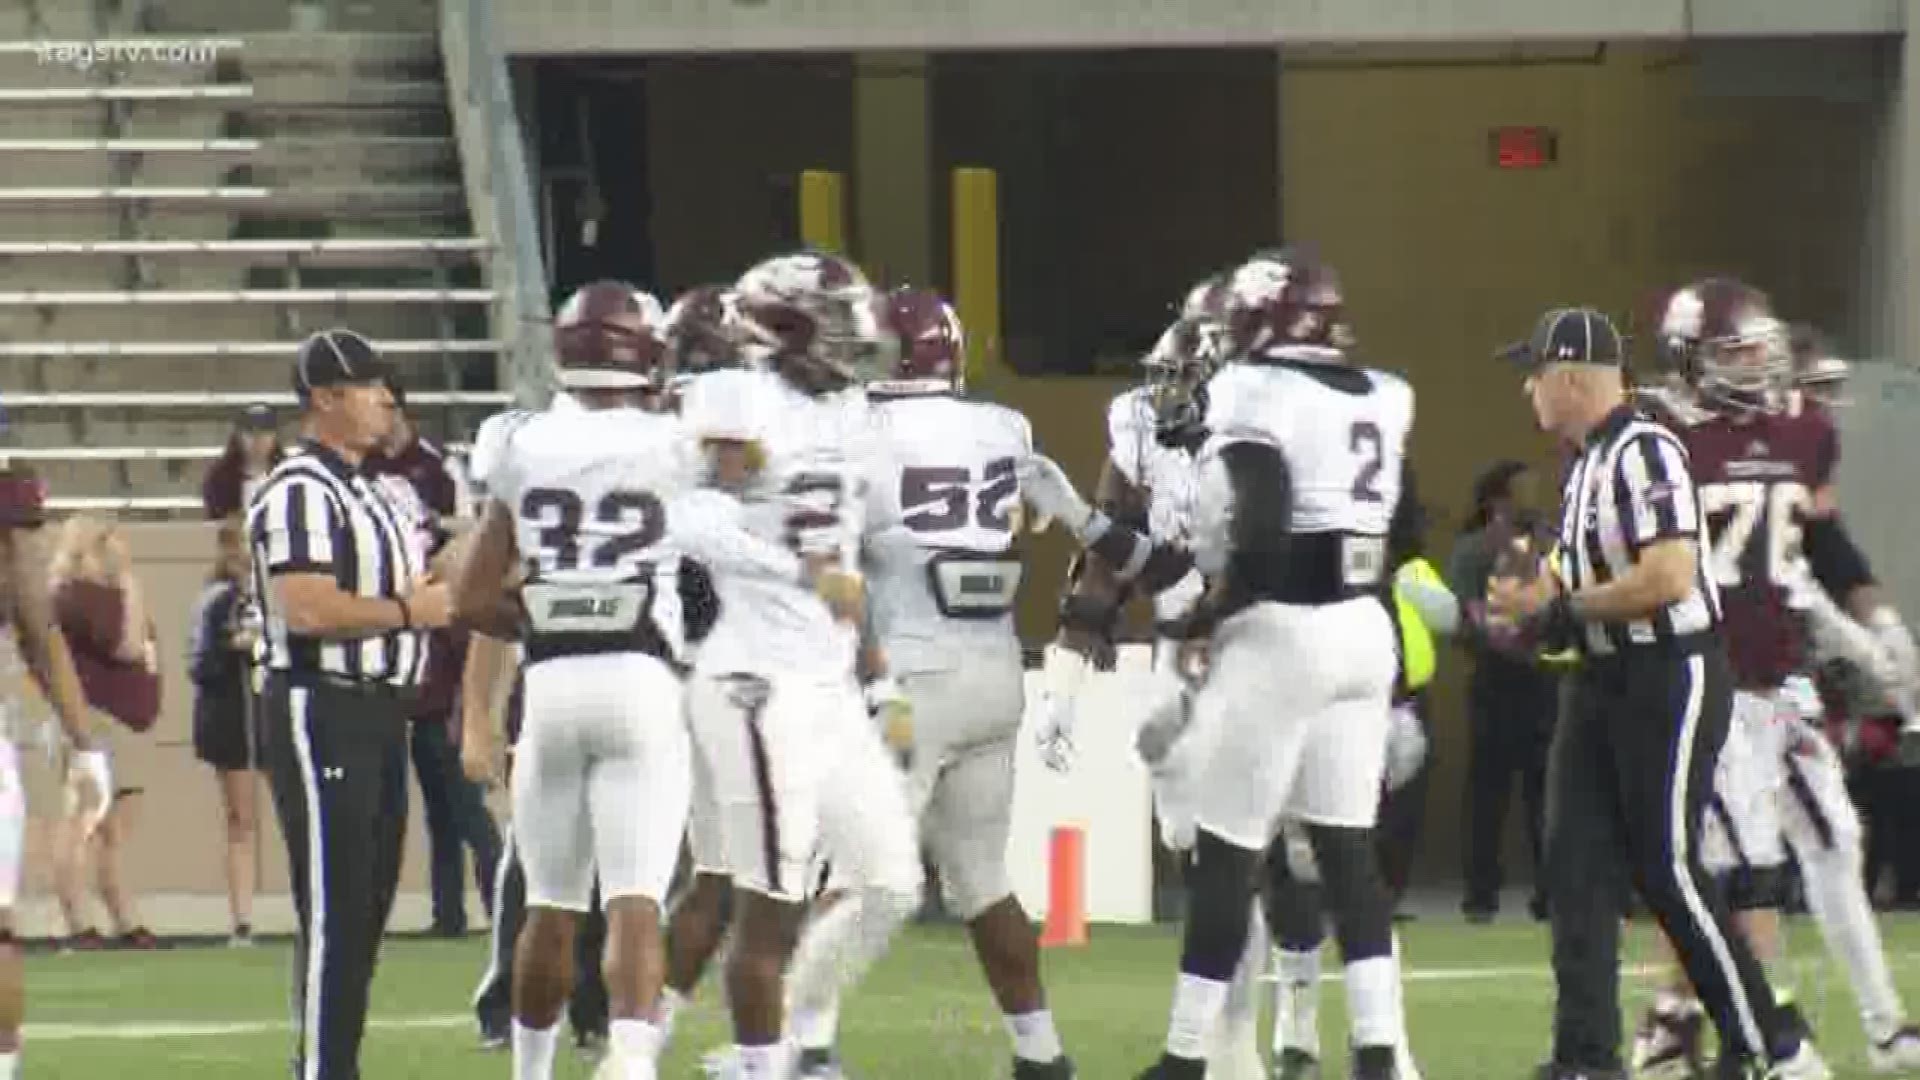 In the annual Texas A&M Football spring game, the White team knocked off the Maroon team 17 to 14. Quarterback Kellen Mond threw two touchdown passes to help lead the White team to victory.